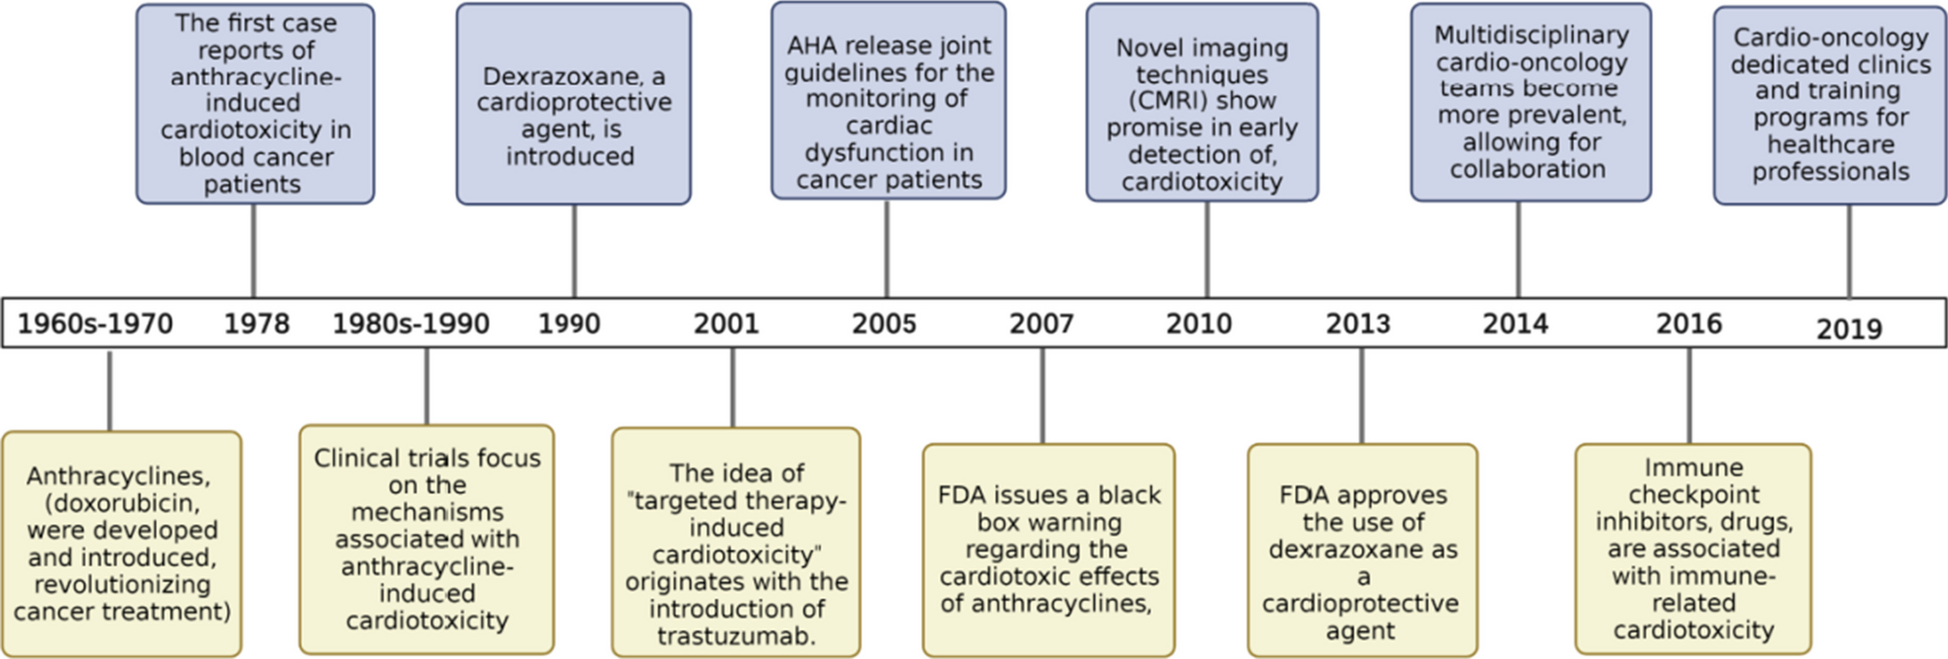 A Comprehensive Review of Cancer Drug–Induced Cardiotoxicity in Blood Cancer Patients: Current Perspectives and Therapeutic Strategies